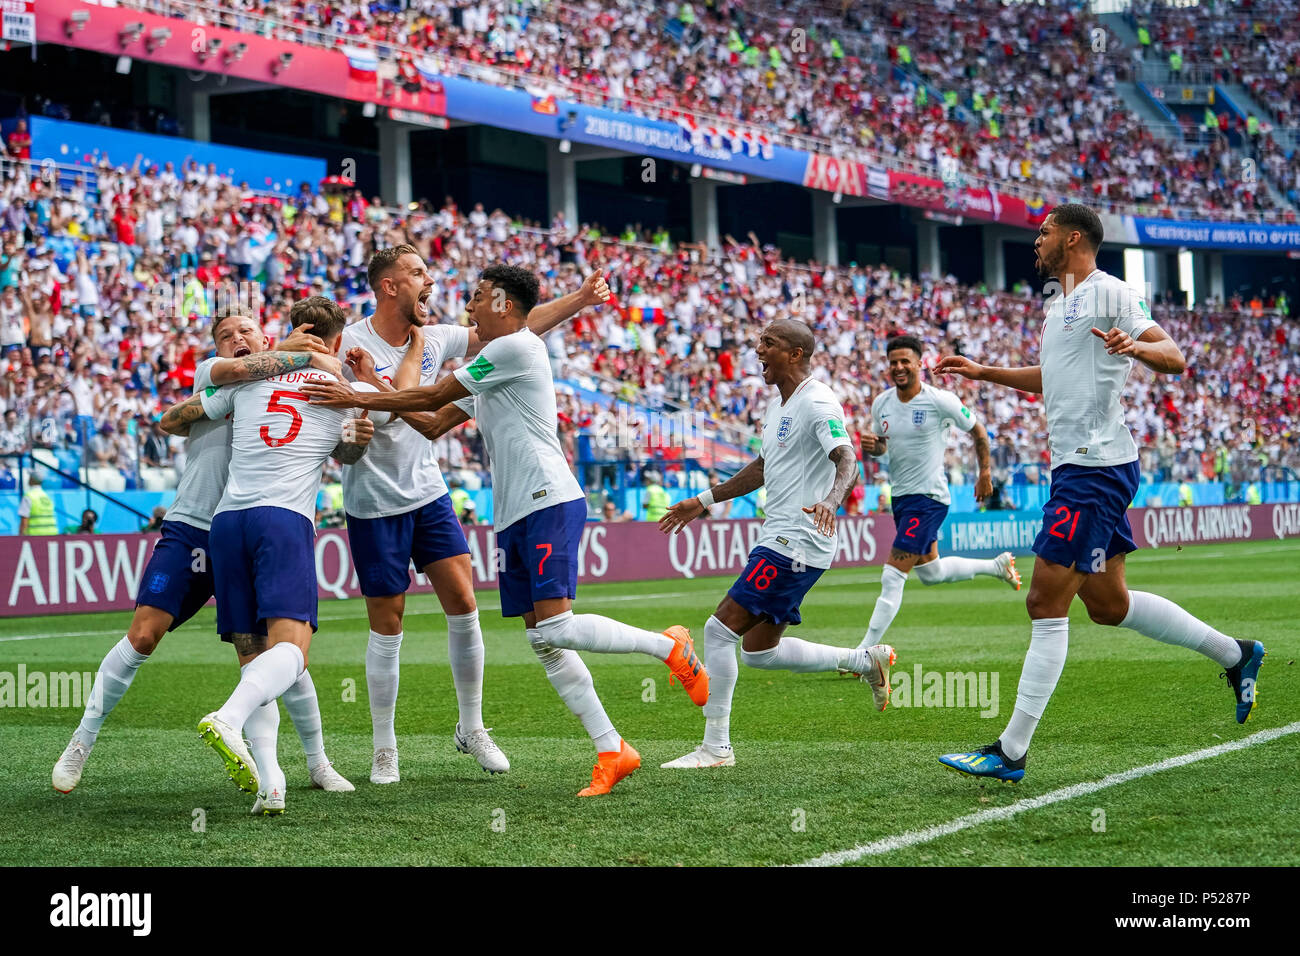 Nizhny Novgorod Stadium, Nizhny Novgorod, Russia. 24th June 2018. FIFA World Cup Football, Group G, England versus Panama; John Stones of England and team celerbrating their goal for 1-0 in the 8th minute Credit: Action Plus Sports Images/Alamy Live News Stock Photo